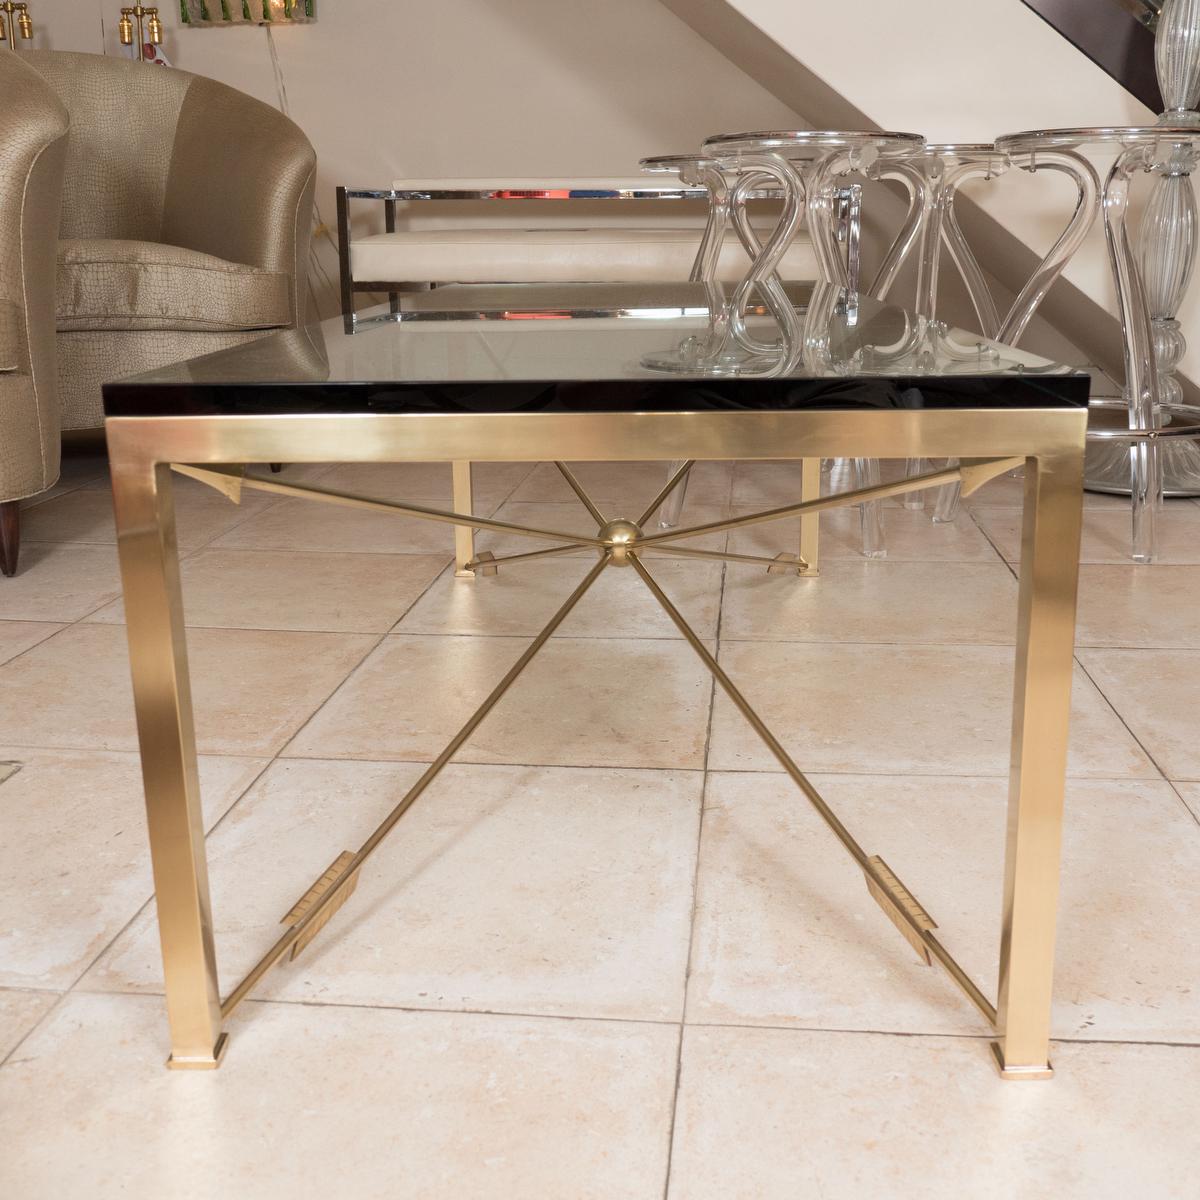 Rectangular coffee table with glass top and intersecting arrow base.